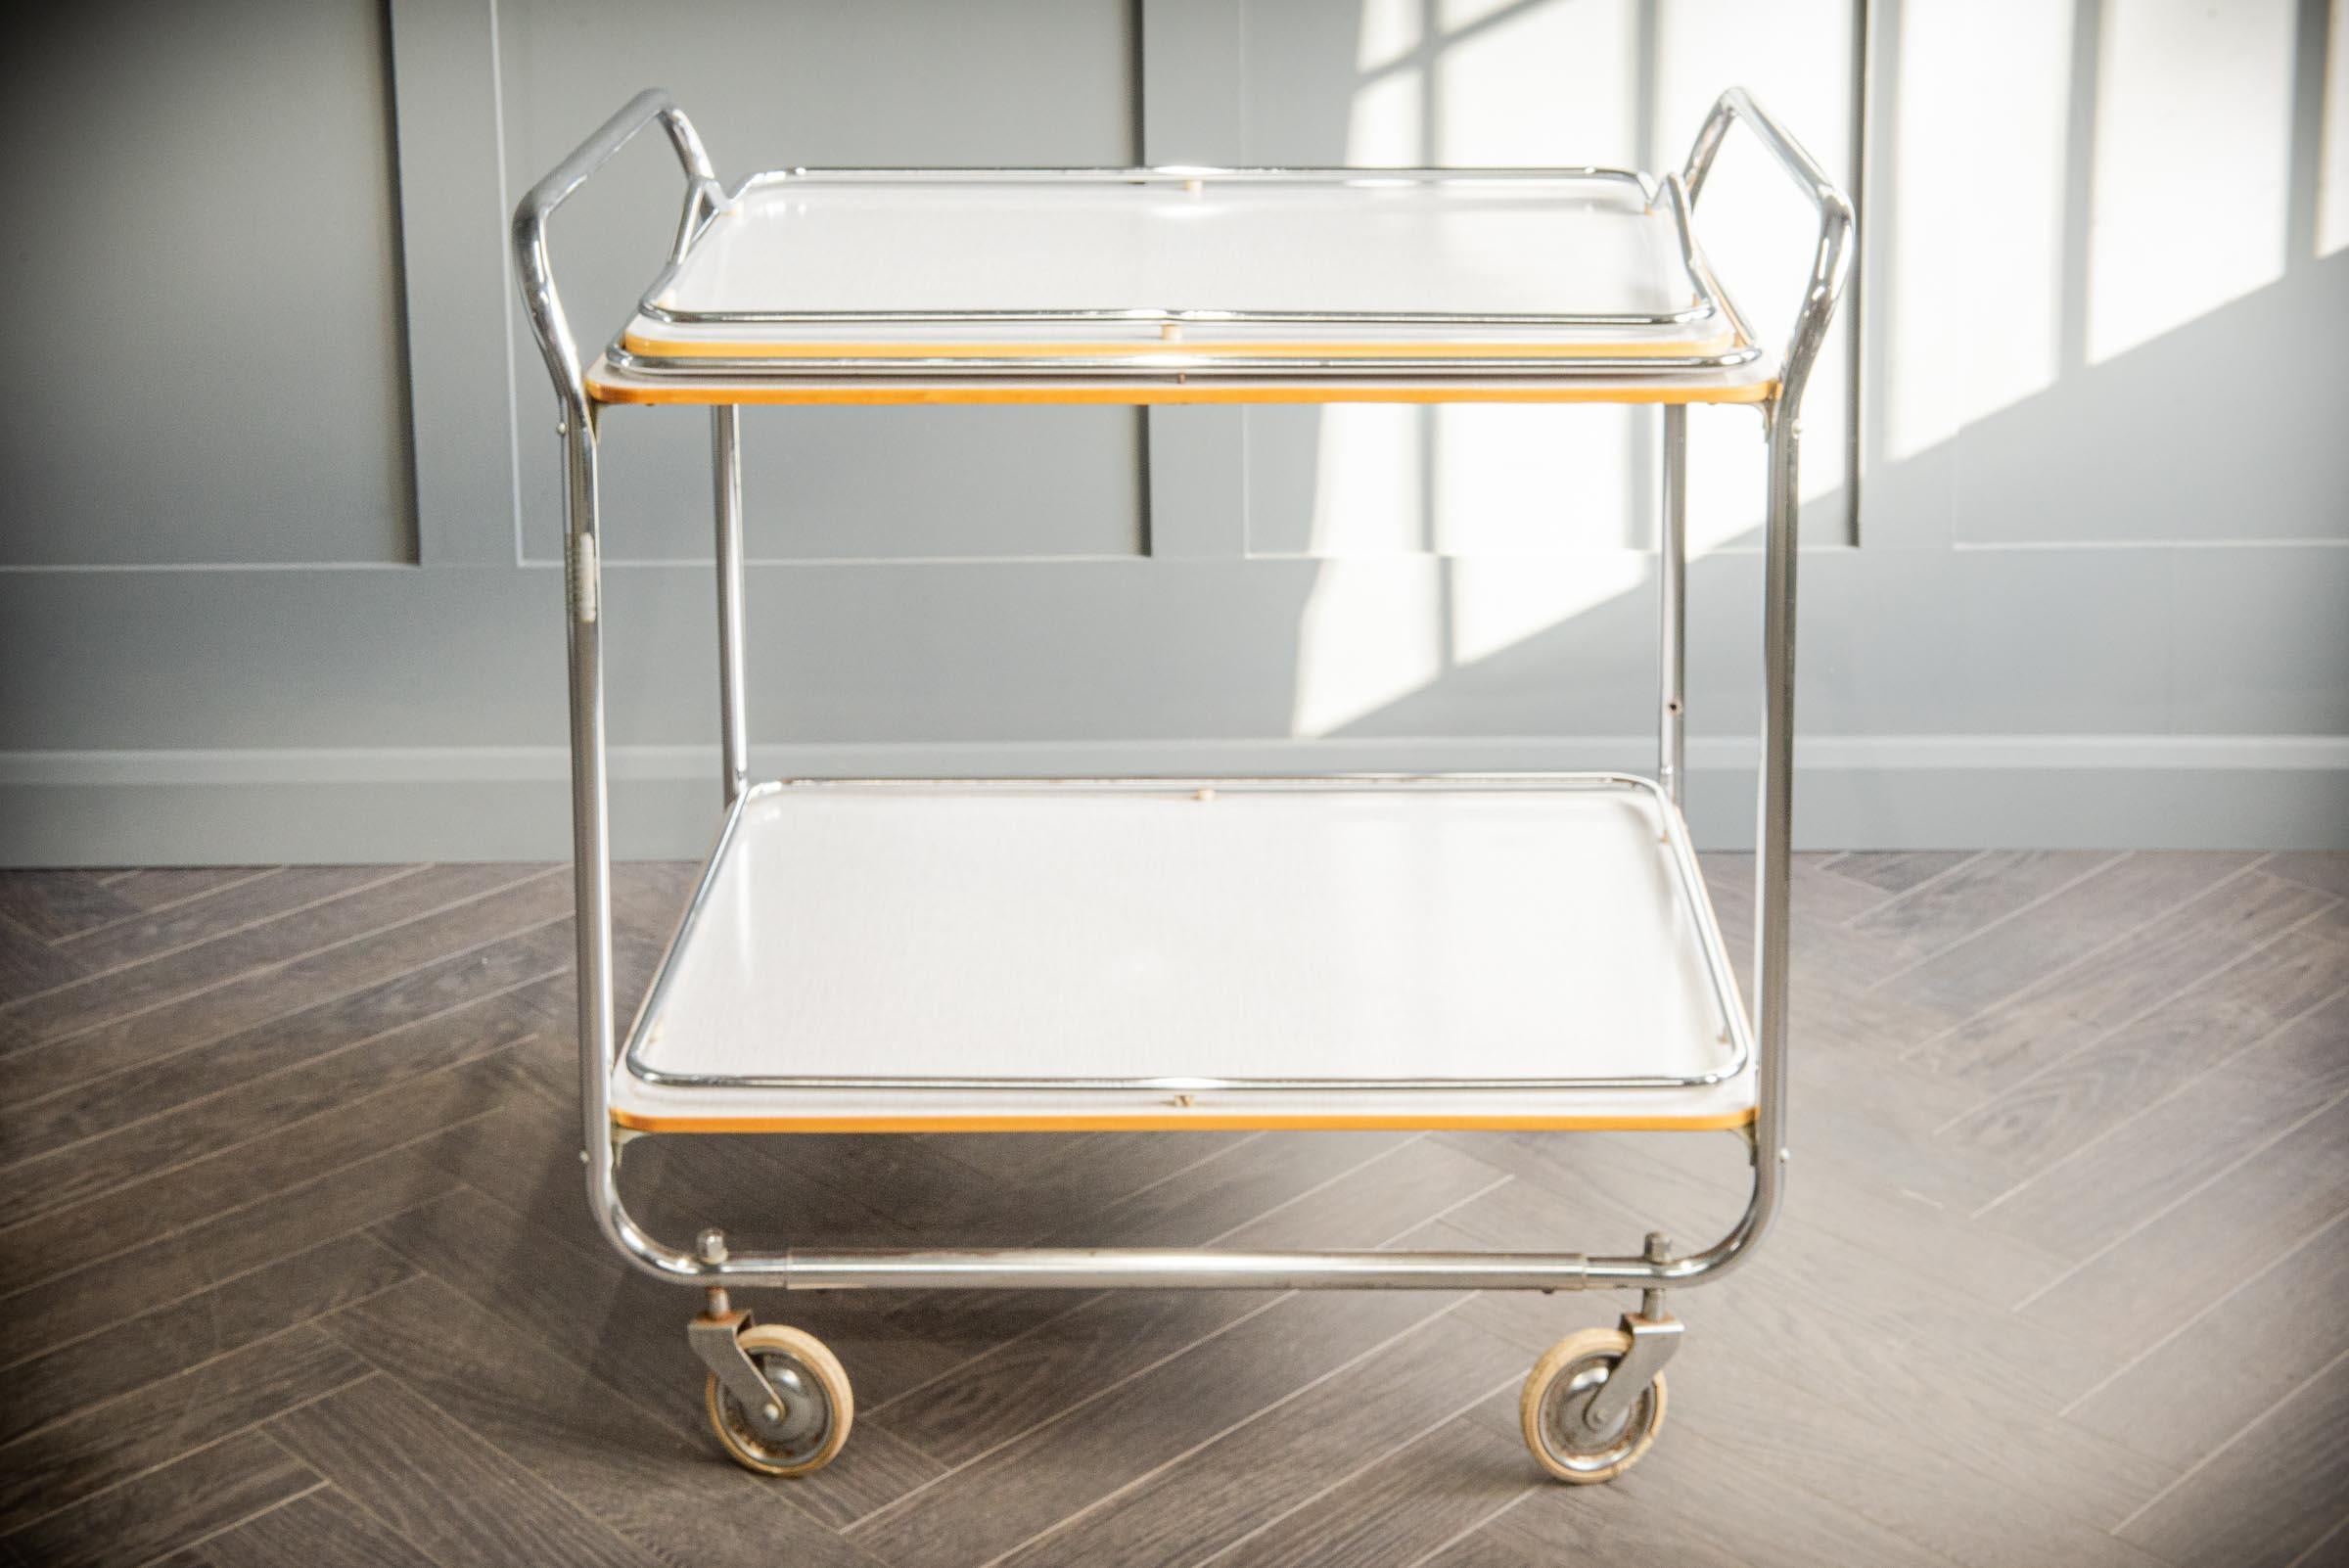 Art Deco cart designed by Torck. Designed as a drinks trolley. Comes with a removable tray top and yellow edging around top and bottom tray. The chrome trolley sits on four dolly wheels for ease of movement.